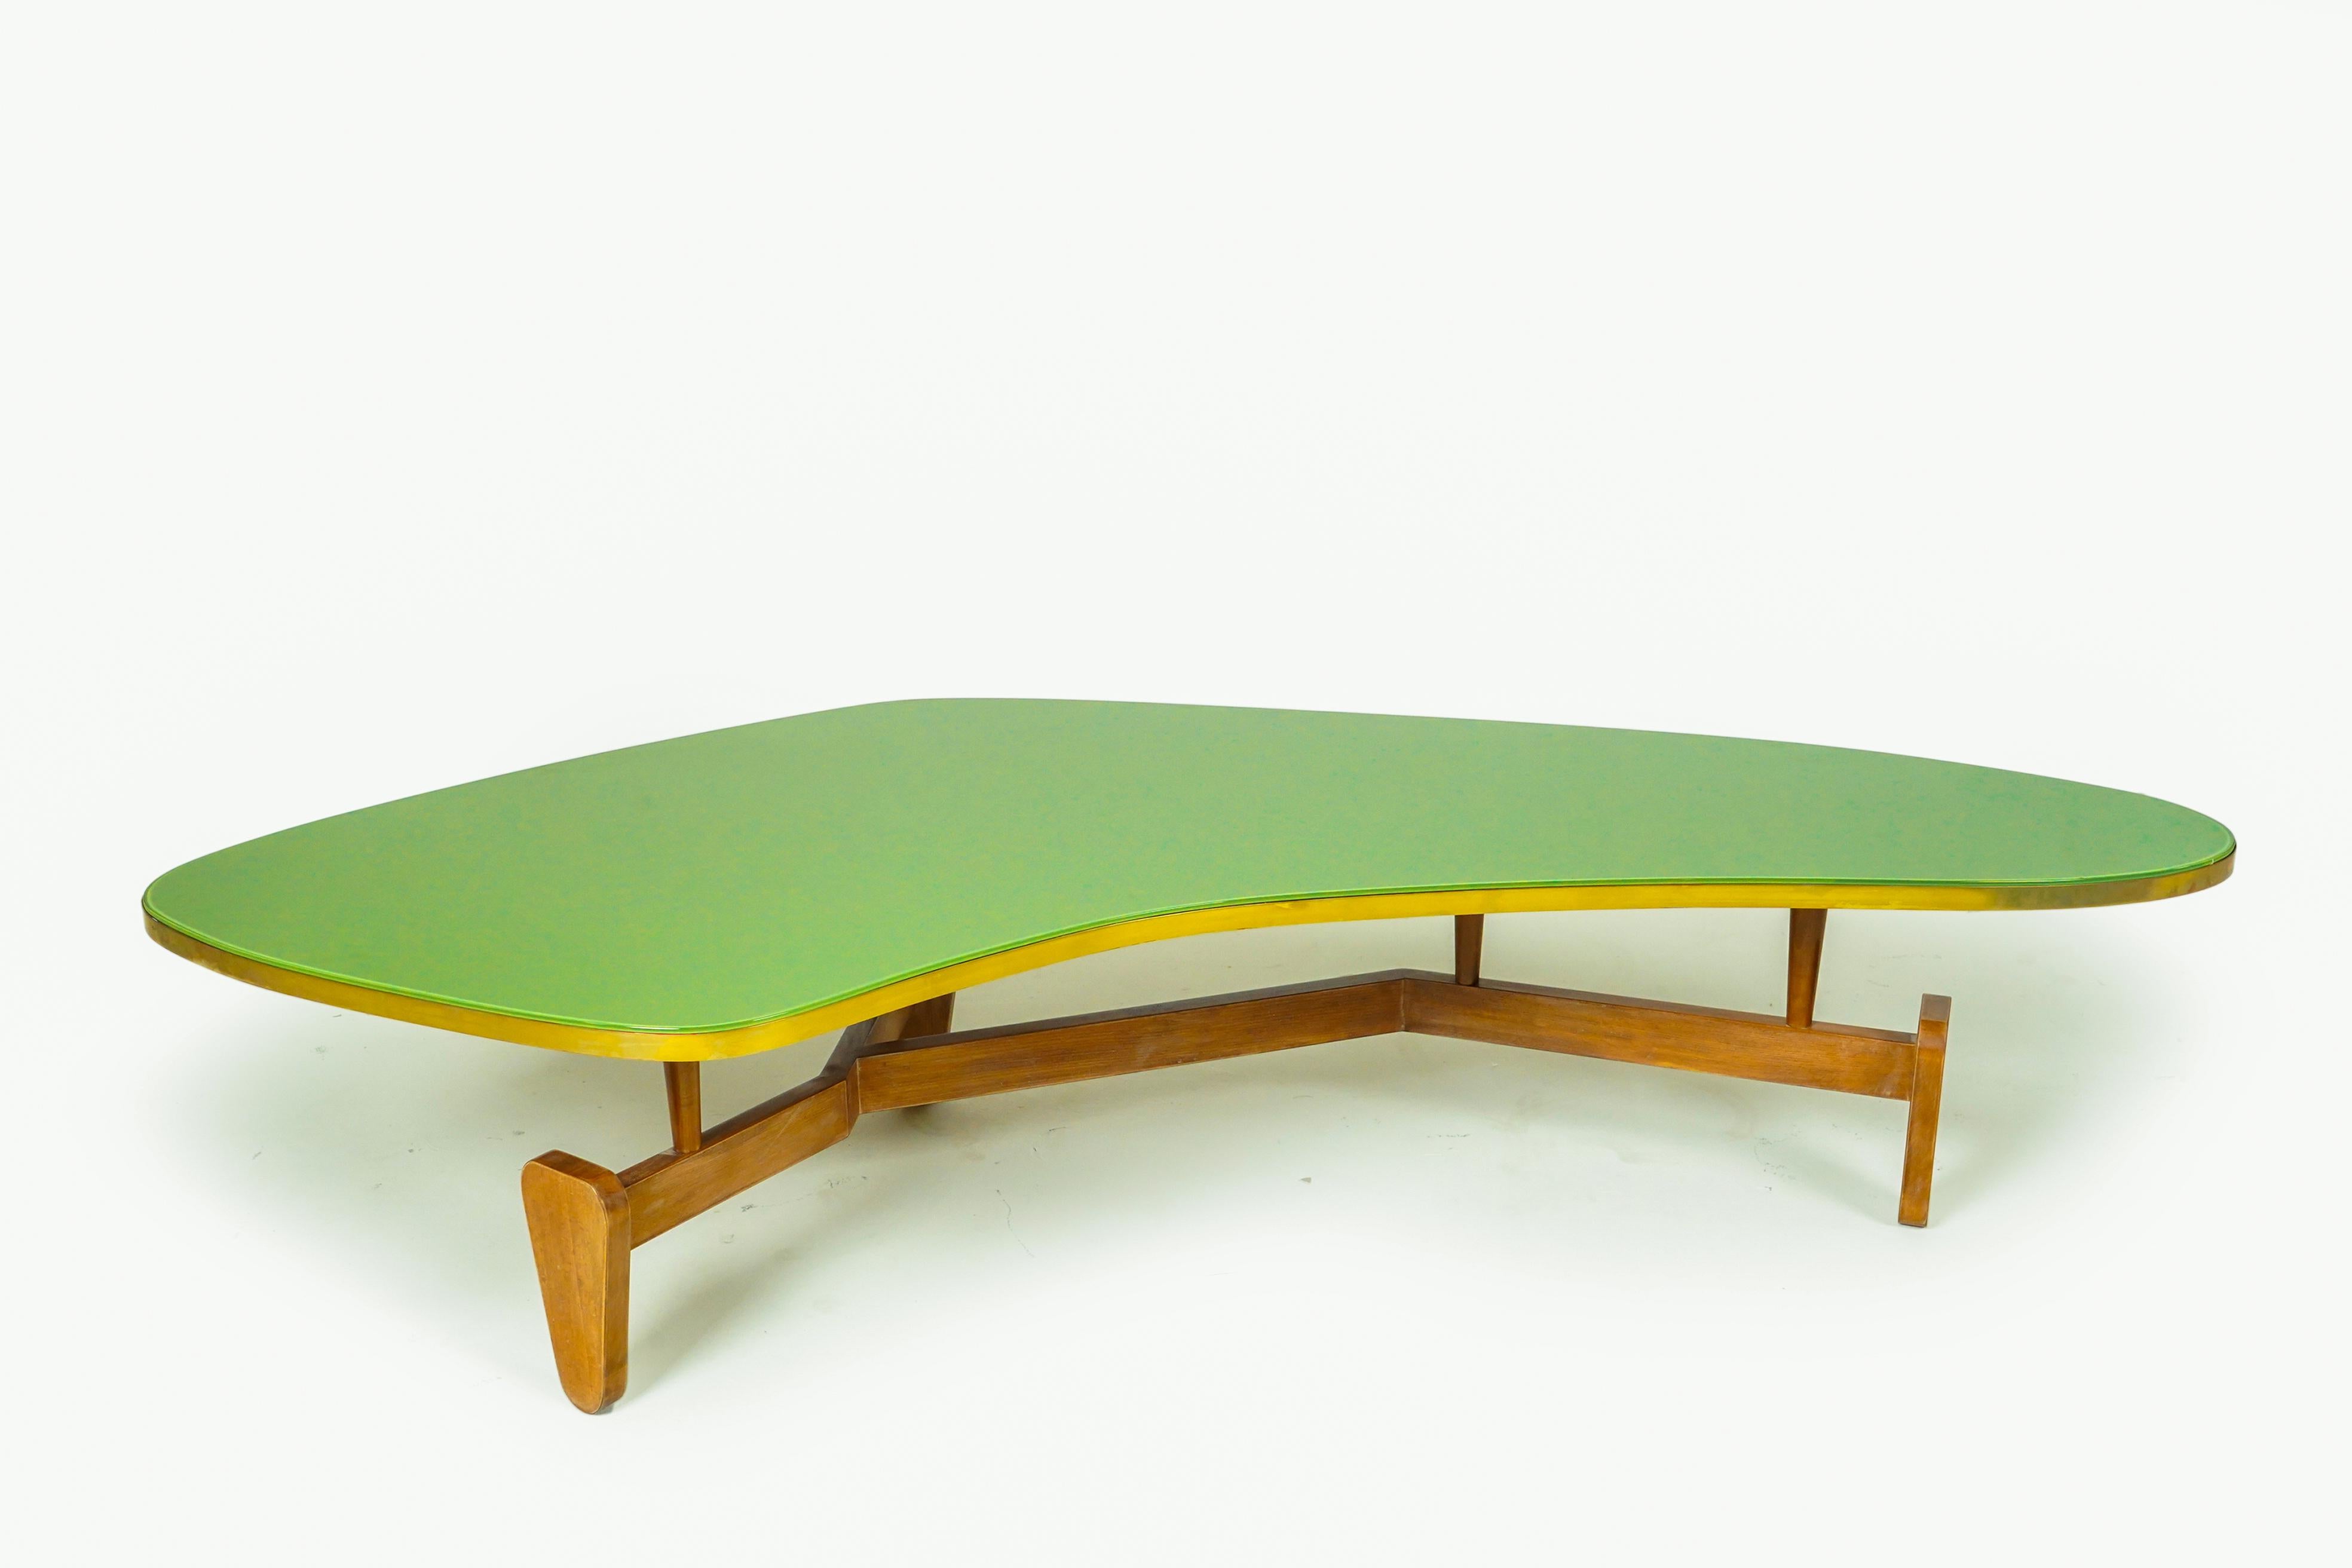 This boomerang-shaped coffee table exemplifies the 